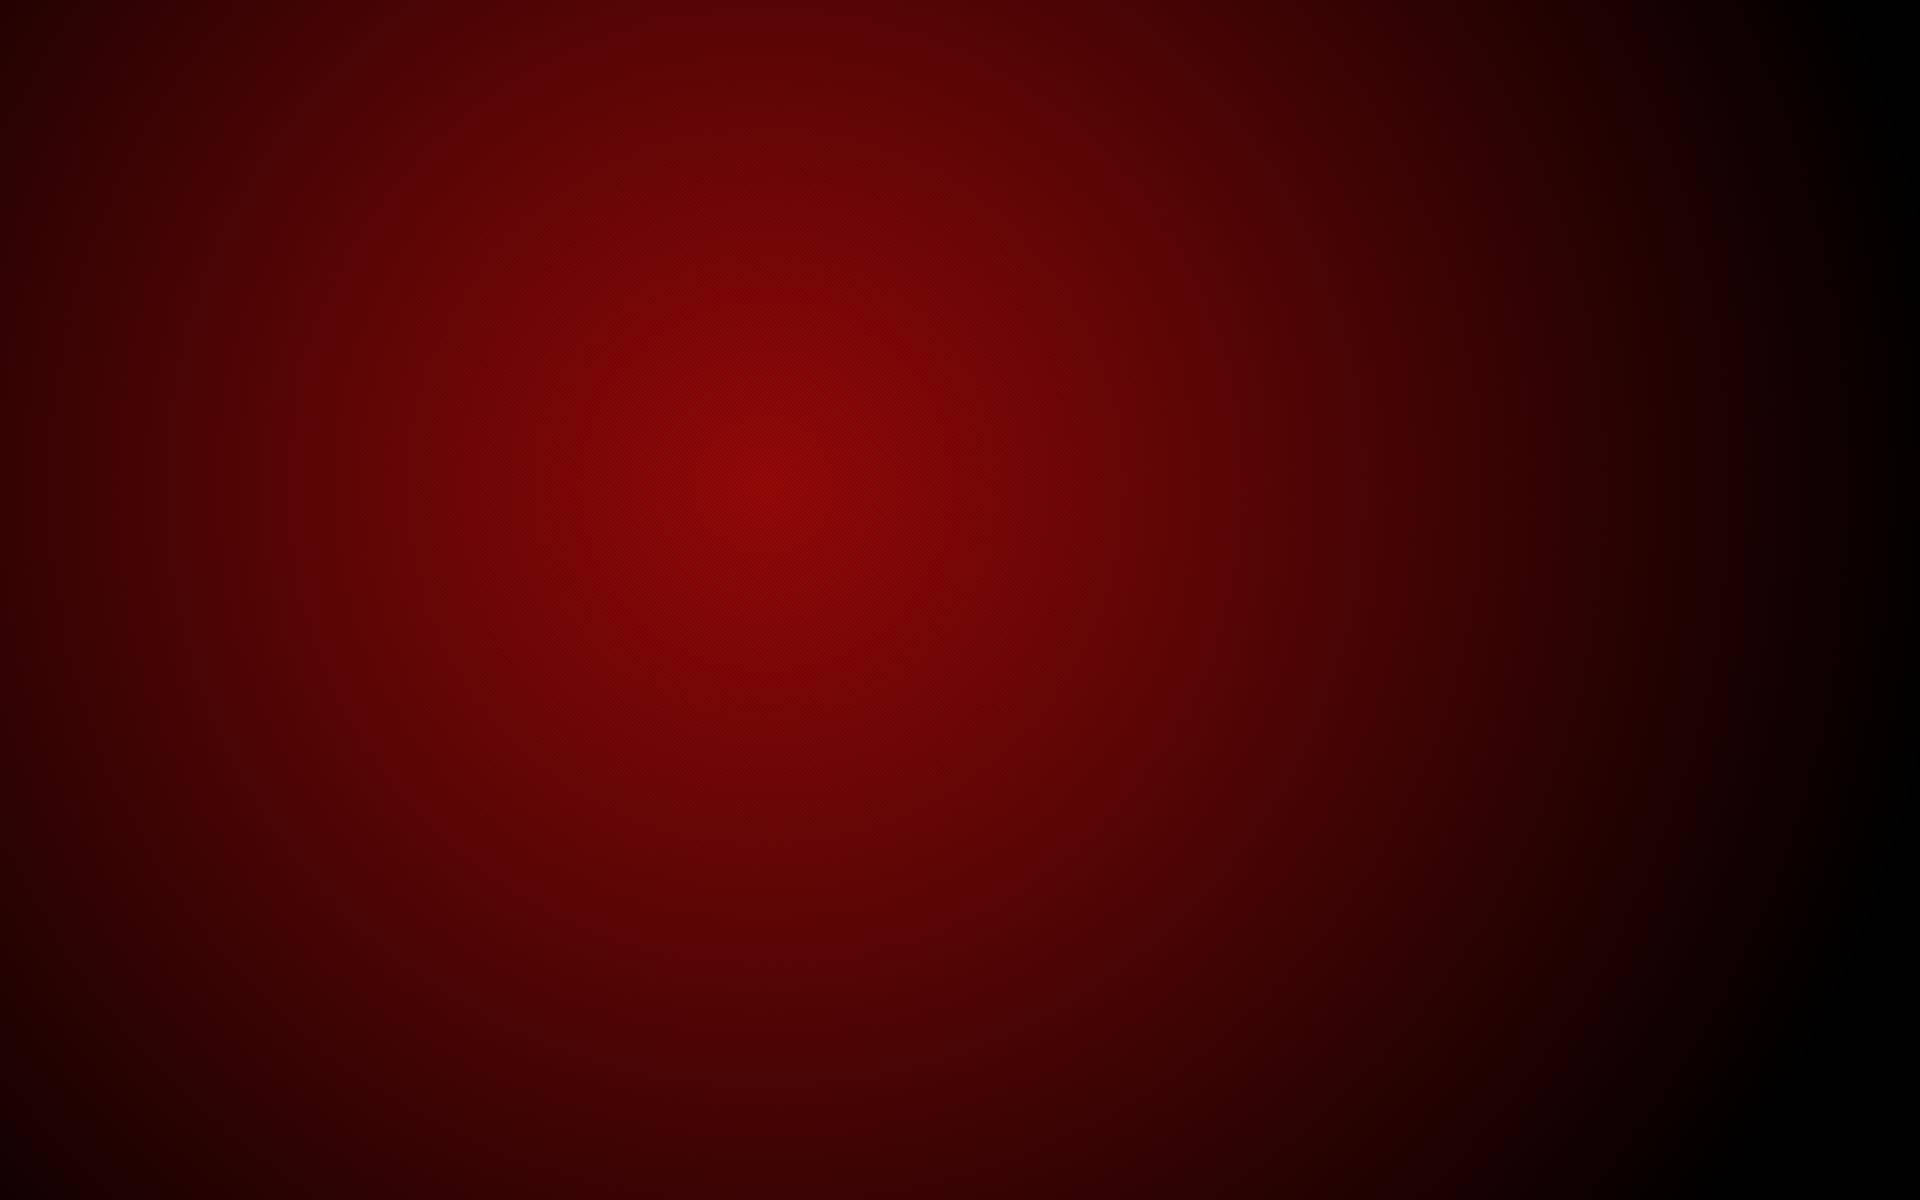 One colour single red plain solid color wallpaper 4K HD